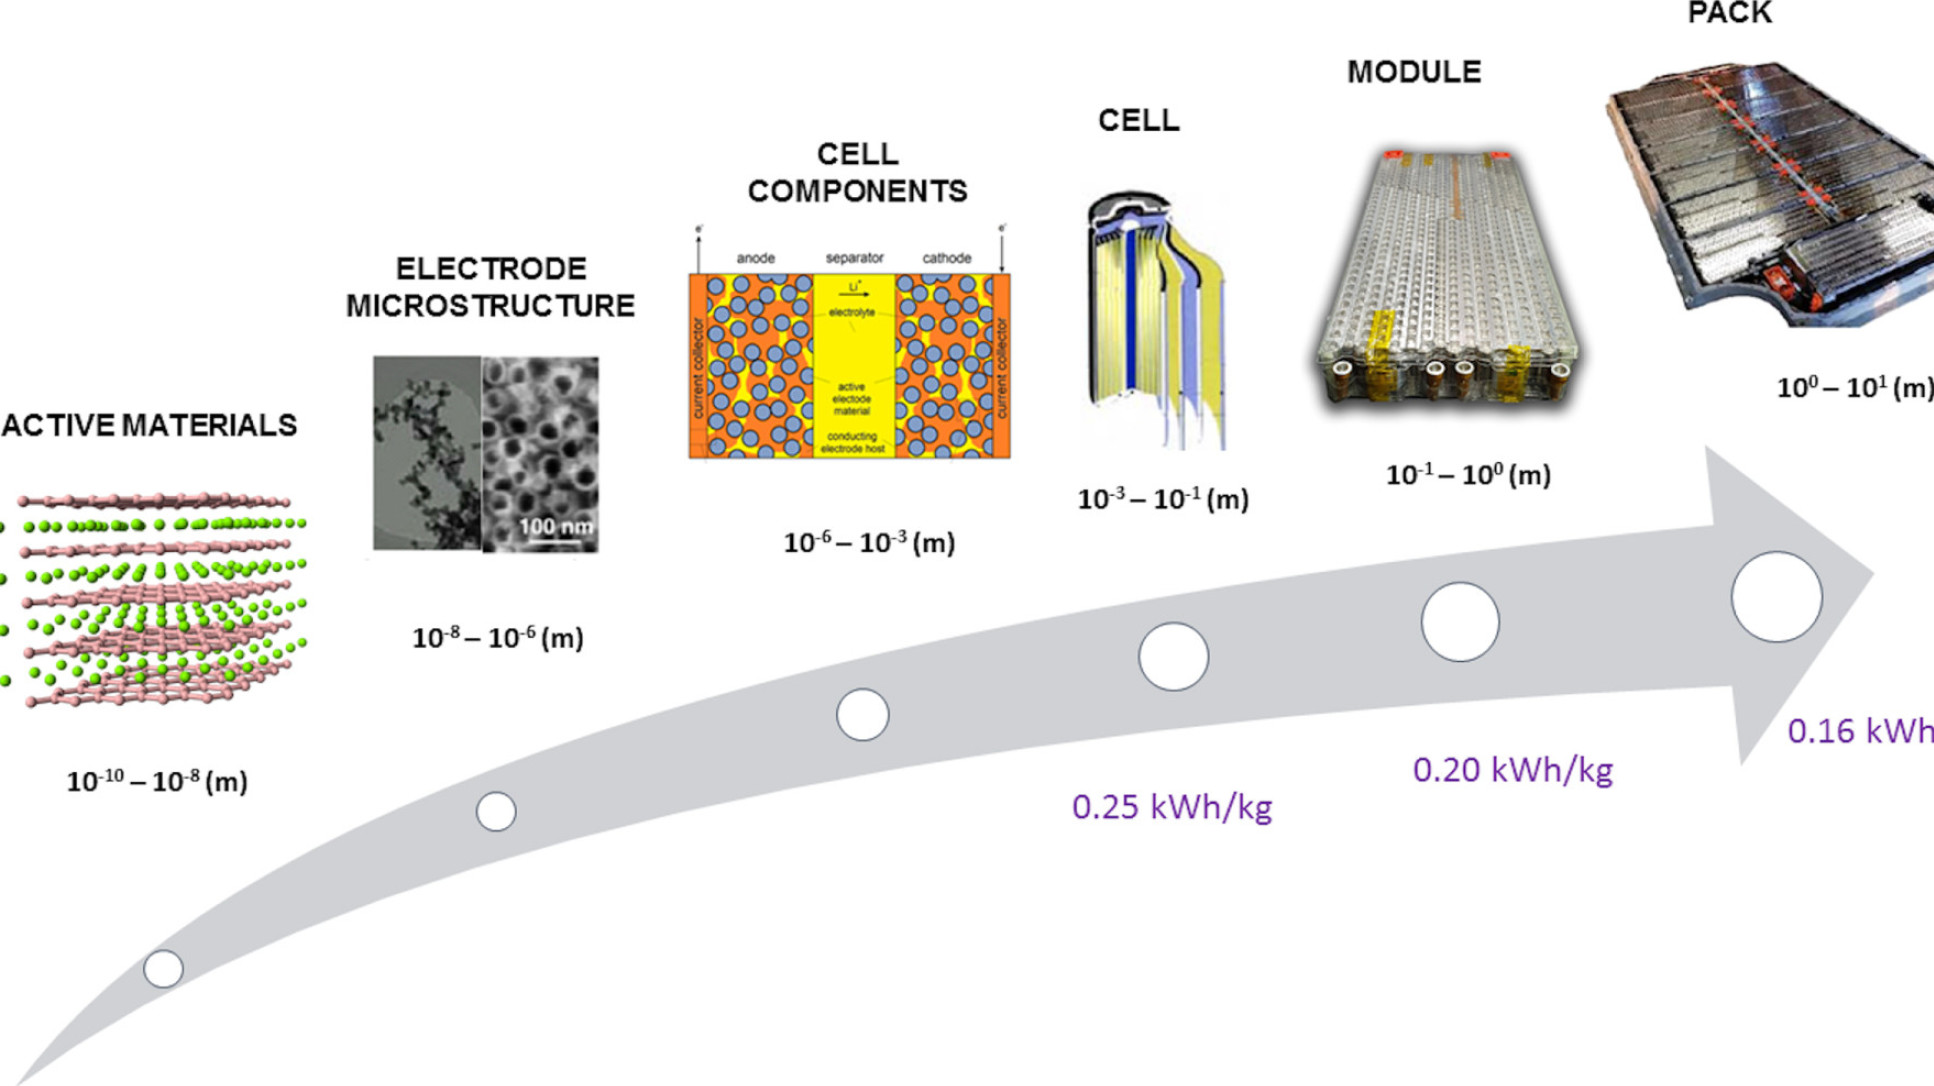 The different scales involved in LIB technology from active materials to cell to pack. At different scales, the fire hazard and the protection strategies are different.